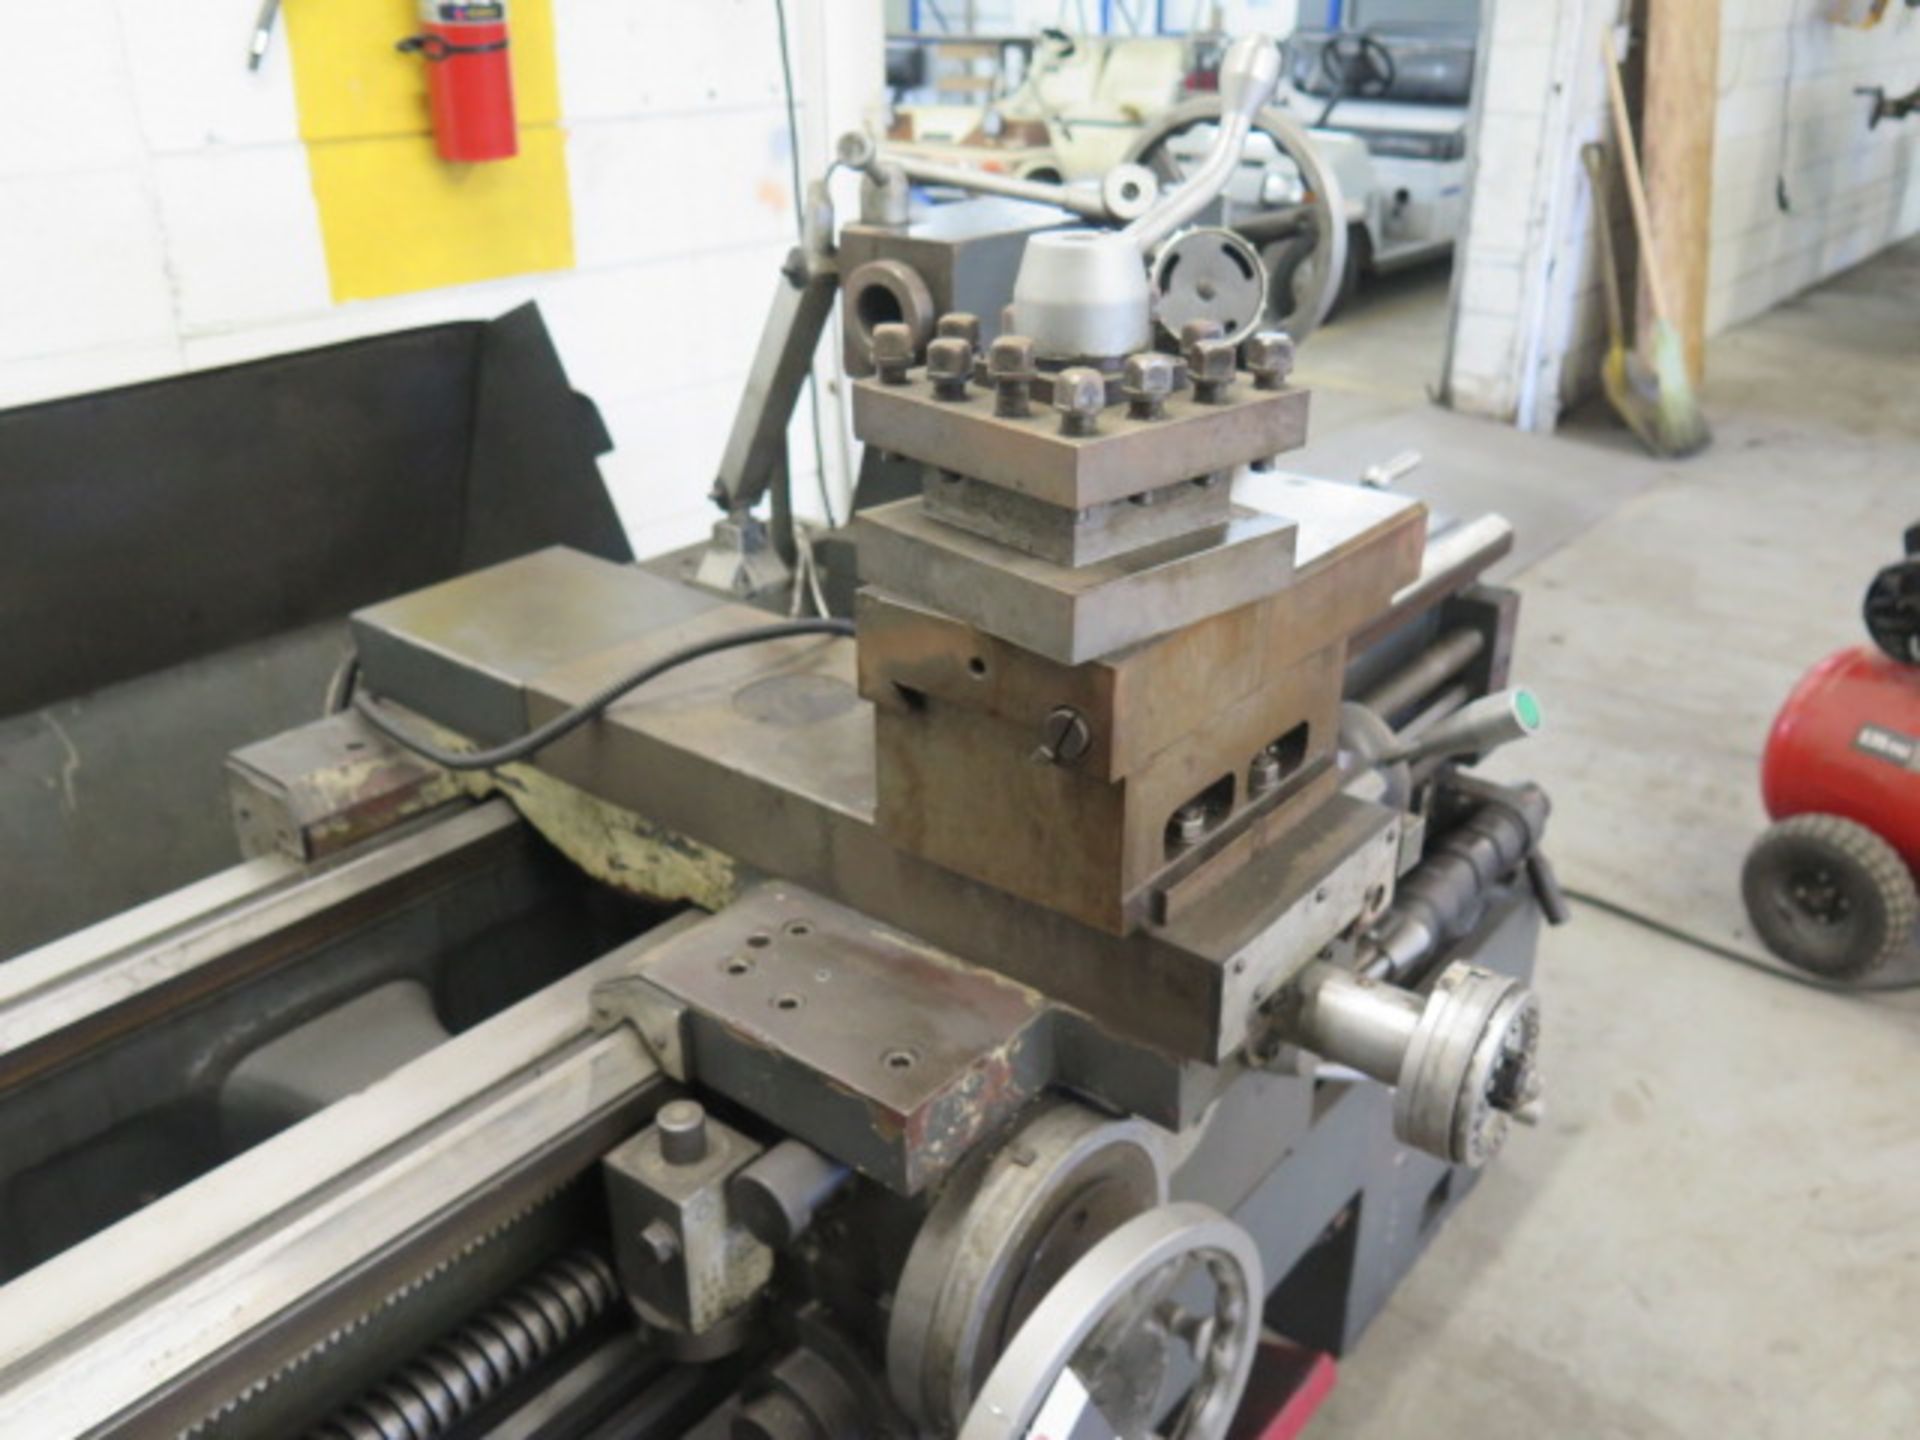 2015 Import 26” x 80” Geared Head Gap Bed Lathe (FOR PARTS) w/ 4 3/8” Thru Spindle Bore - Image 8 of 9